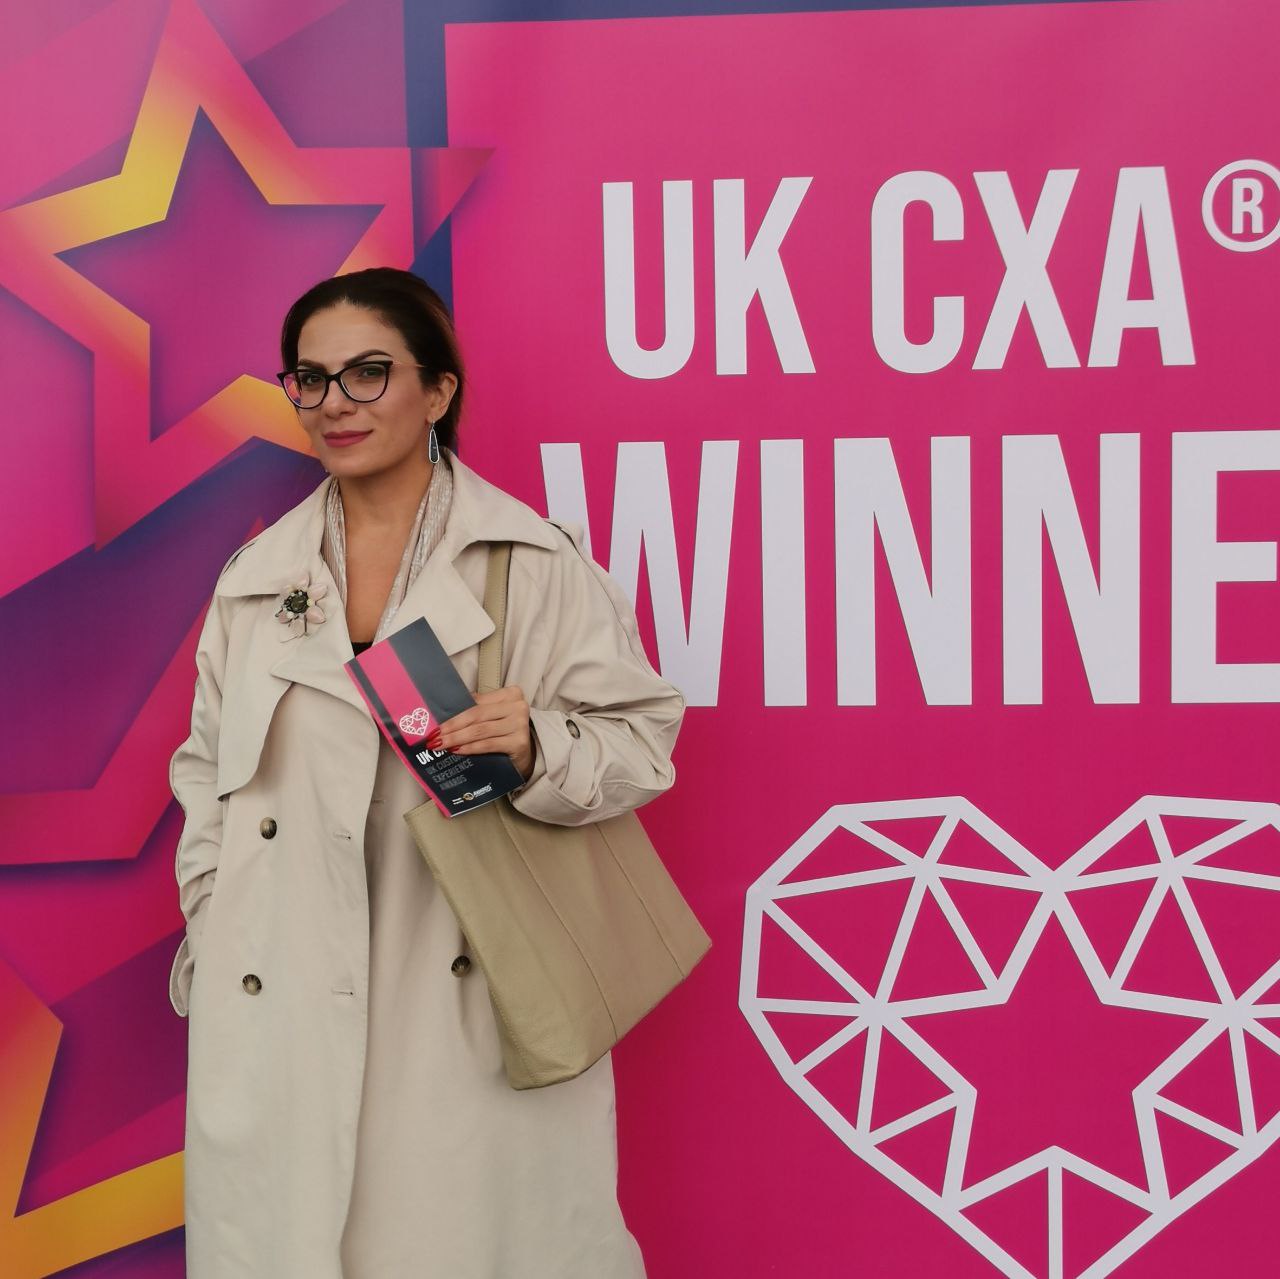 You are currently viewing Whitebone CEO participated in the UK CX Awards 2022<br><br><br><br>